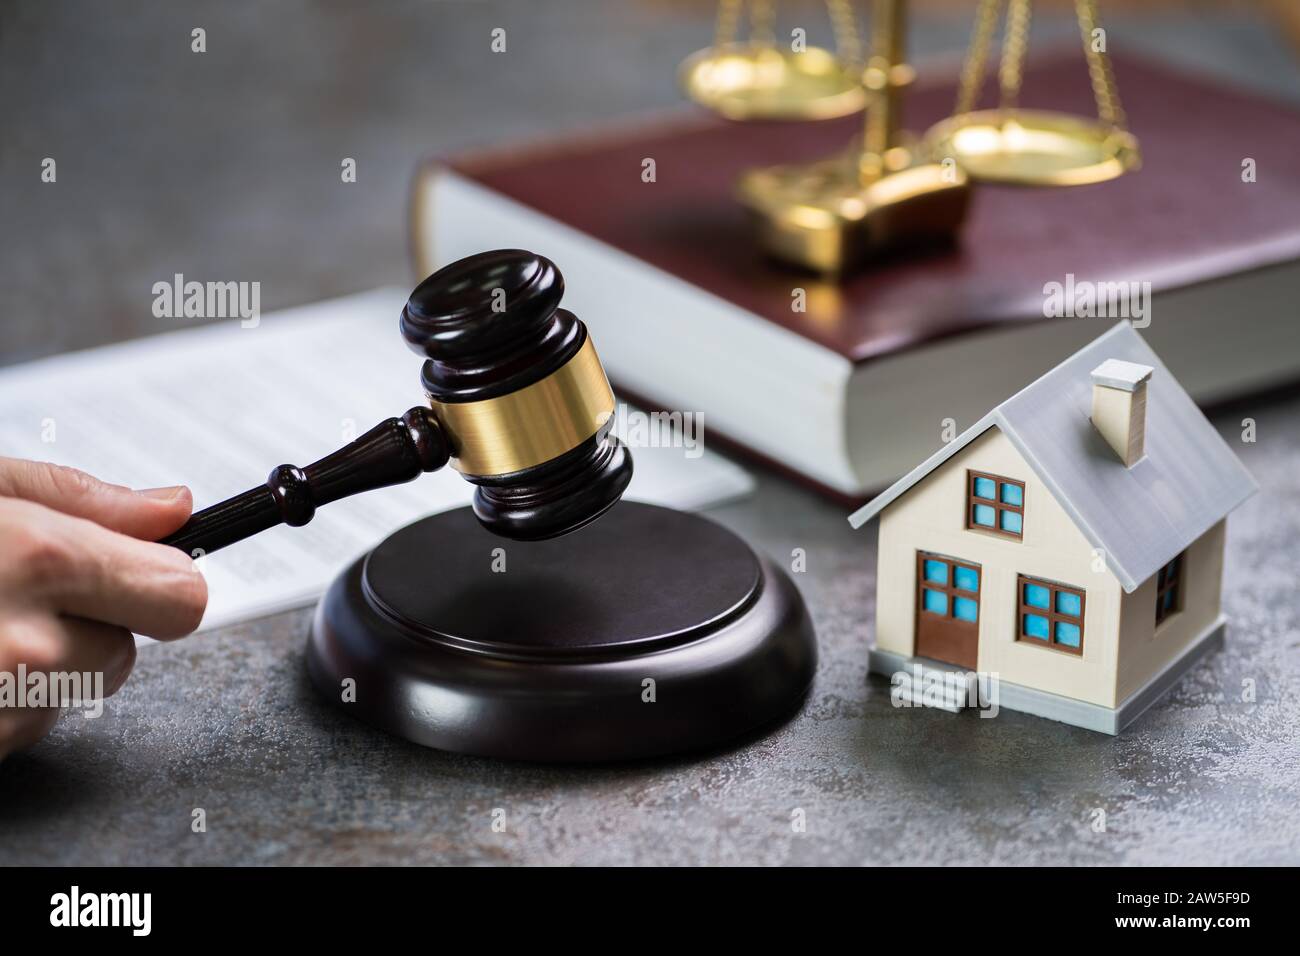 Close-up Of Judge With House Model Striking Mallet At Desk Stock Photo